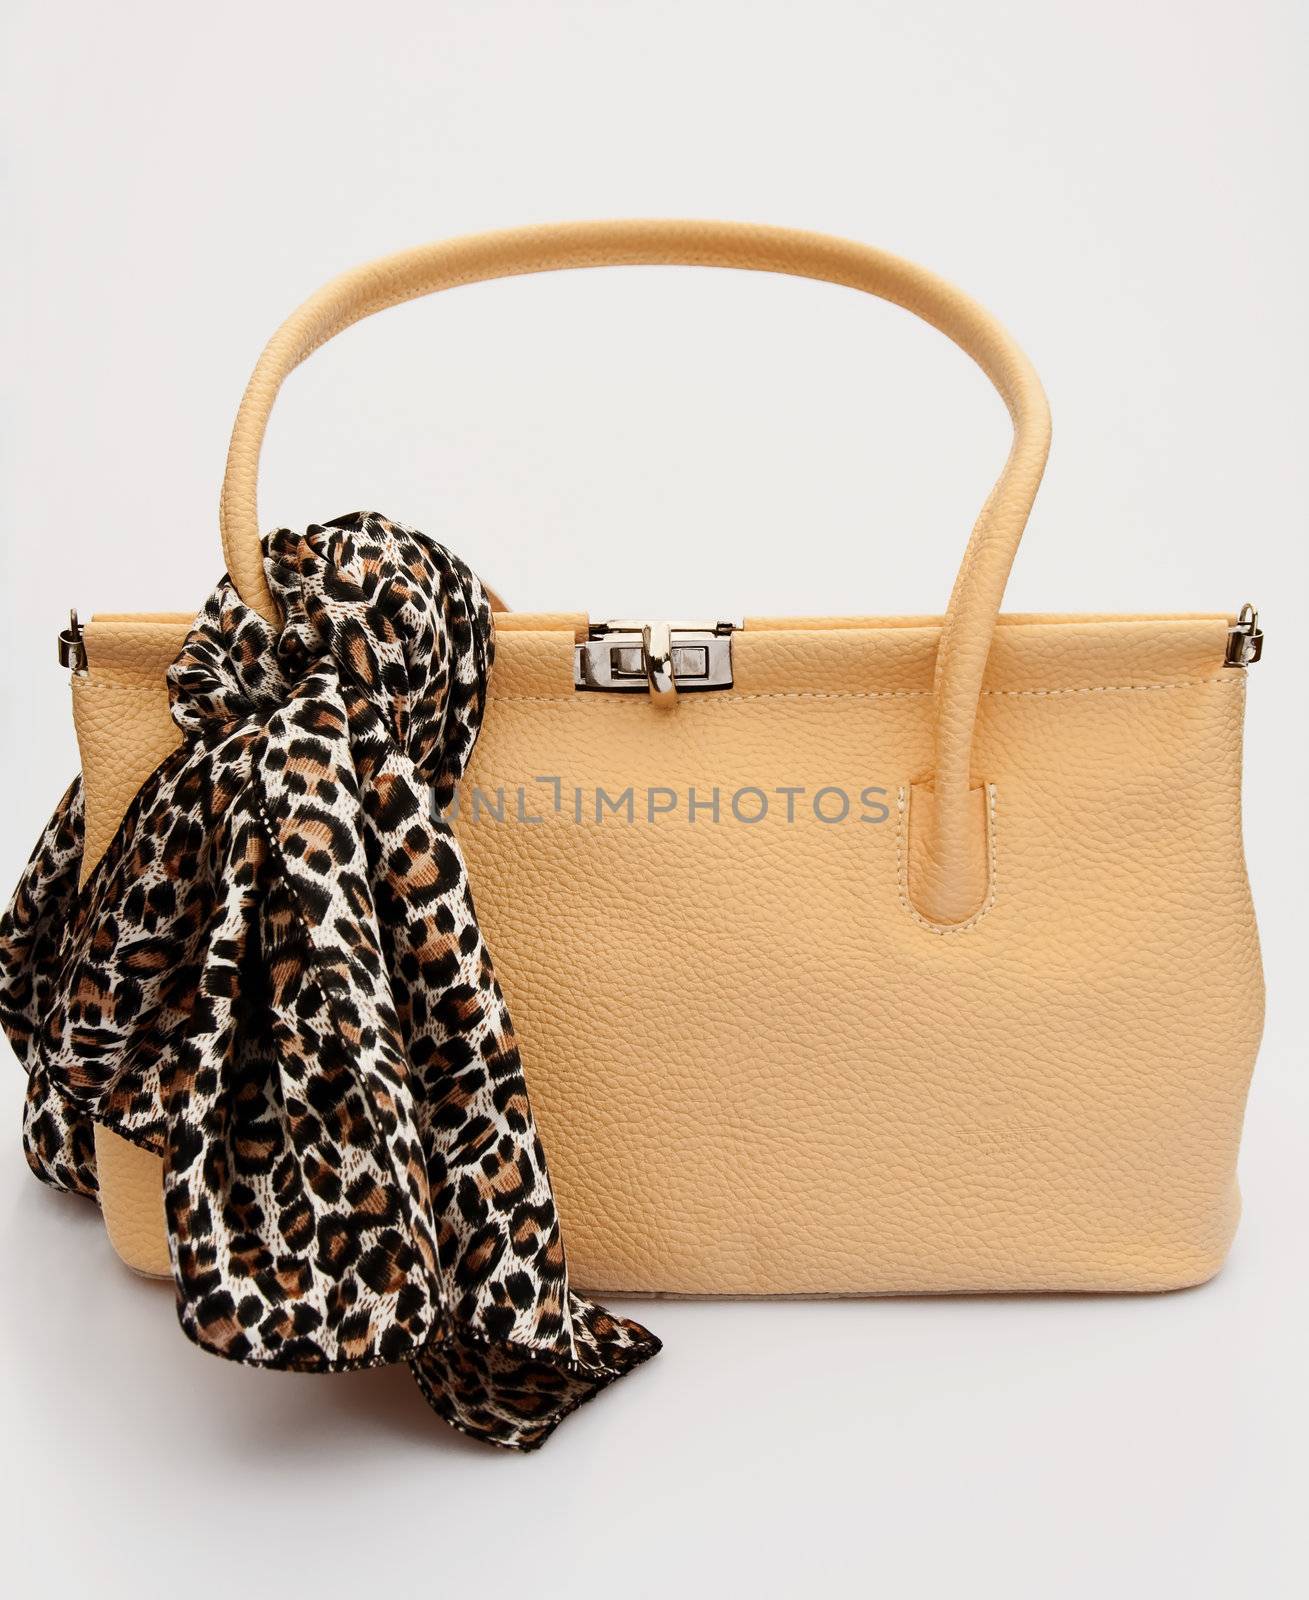 Handbag with leopard patterned scarf by GryT